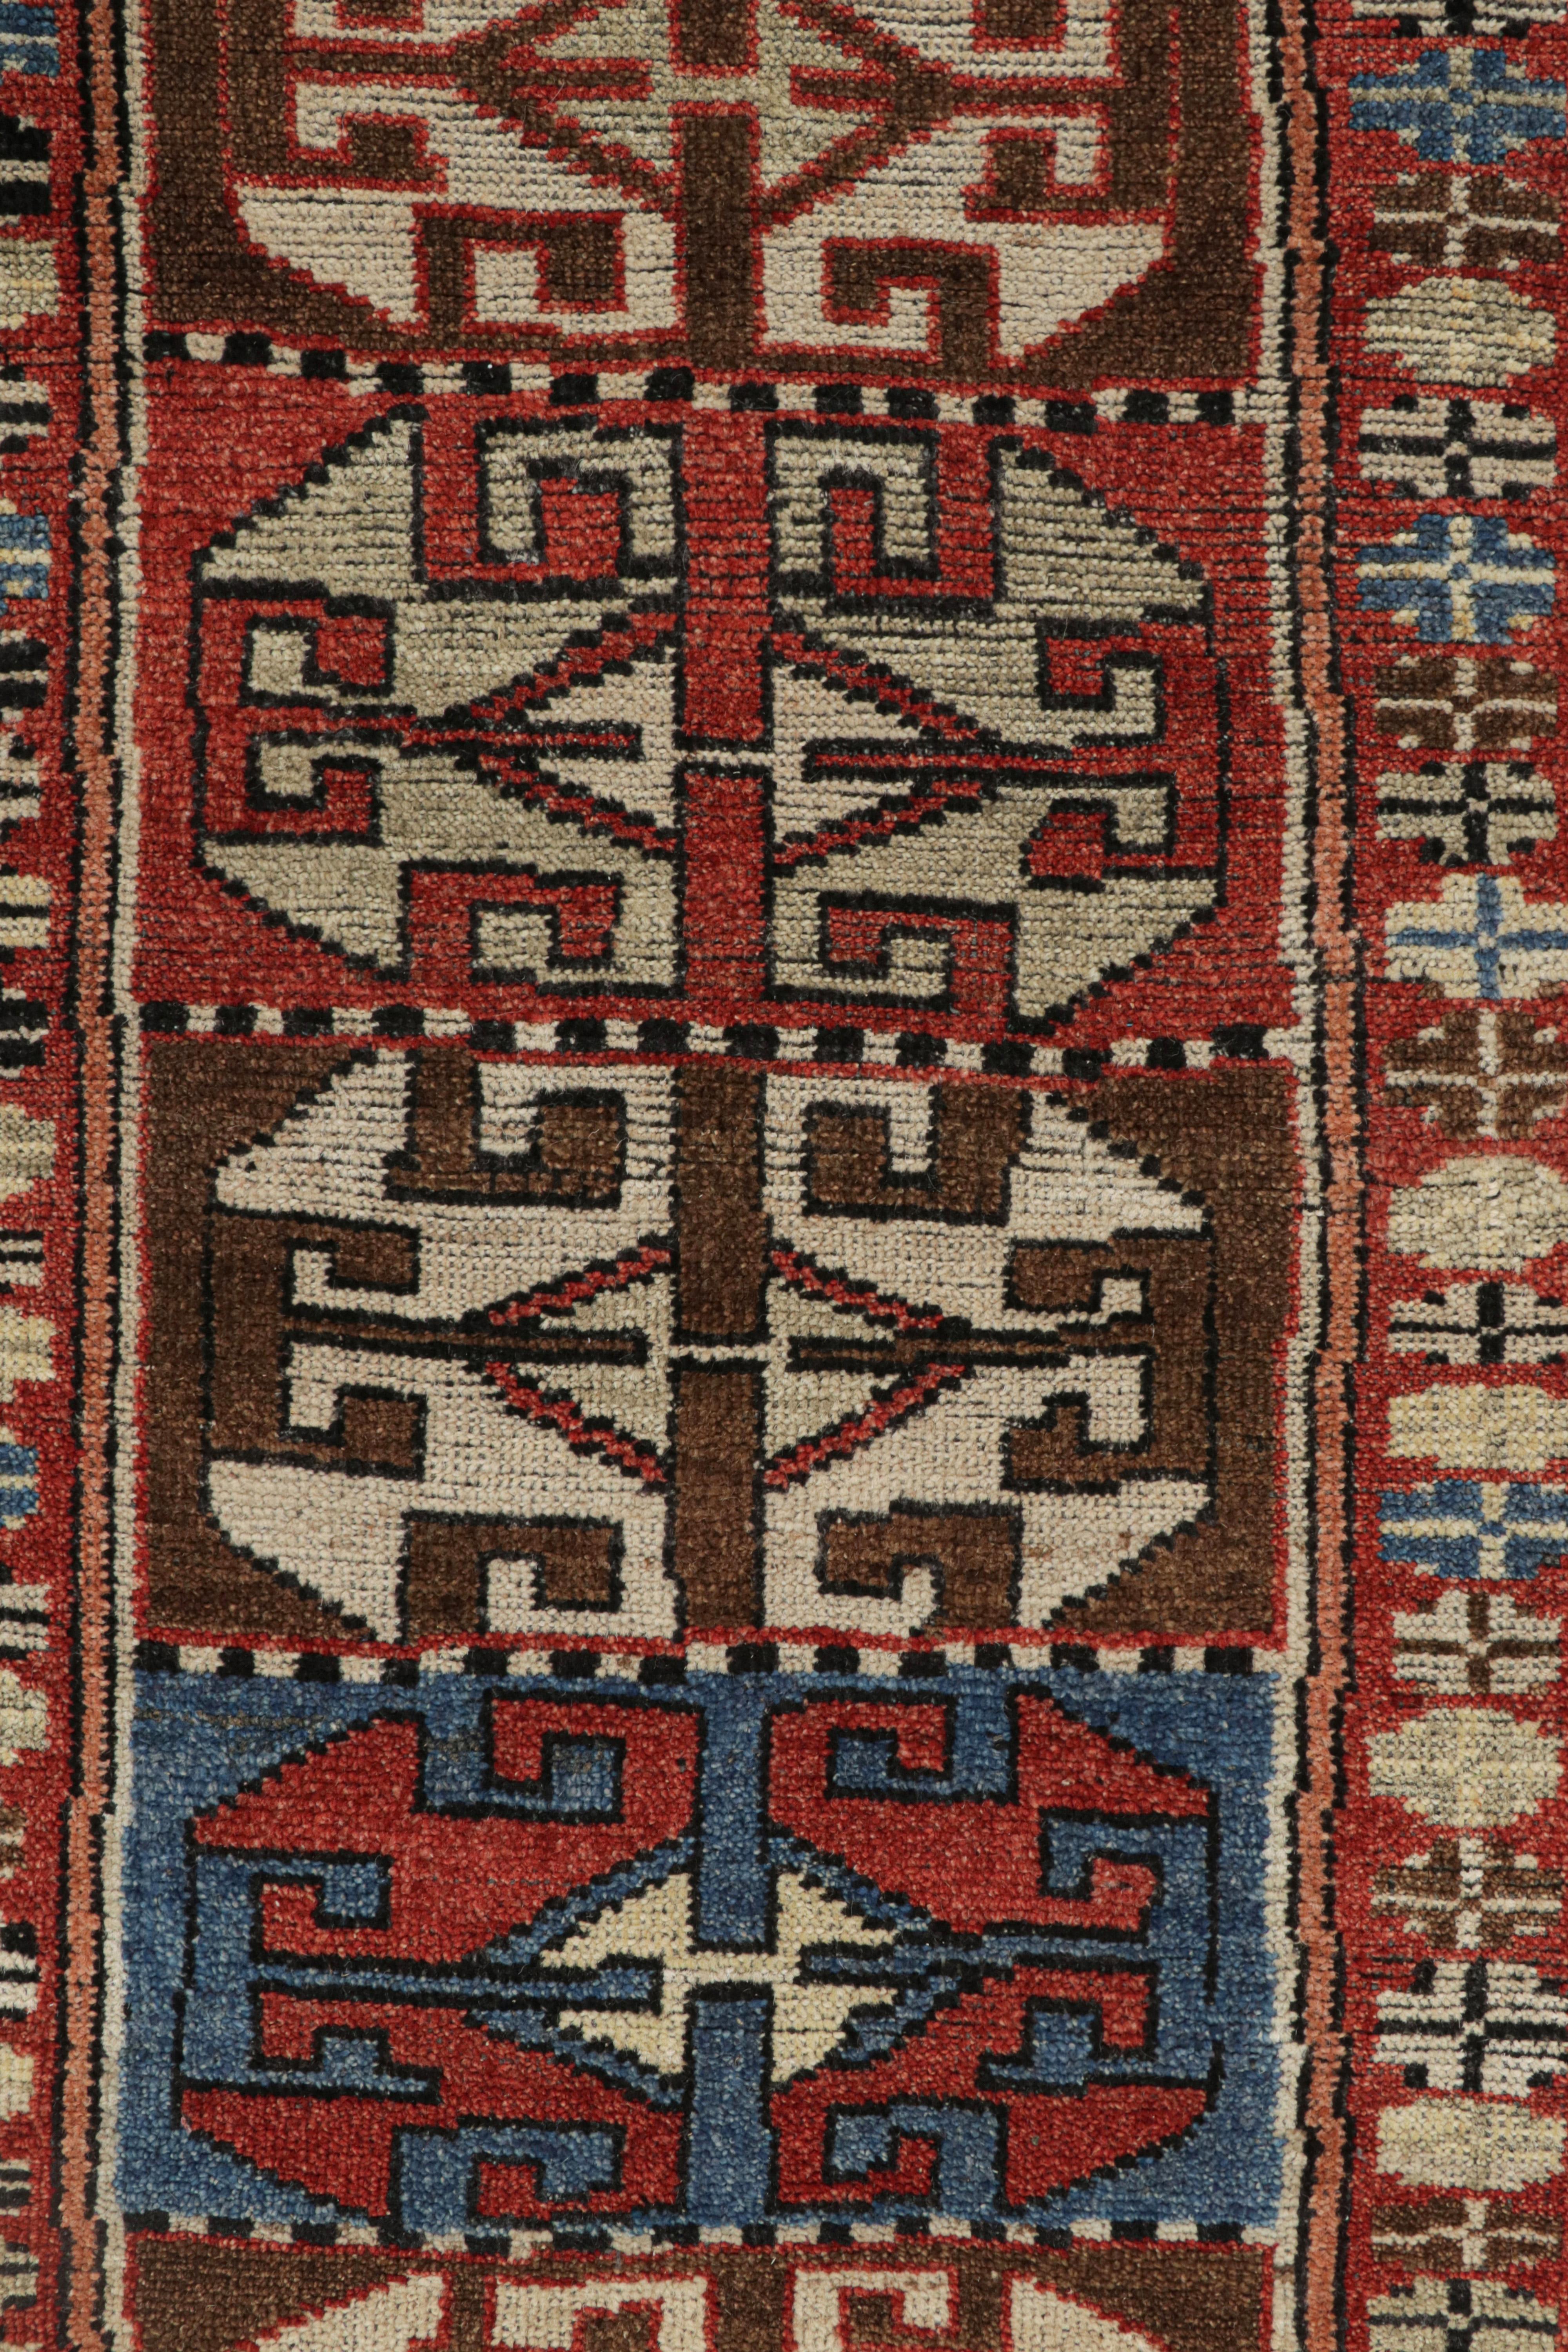 Contemporary Rug & Kilim’s Antique Tribal Style Rug in Red, Blue & Brown Patterns For Sale